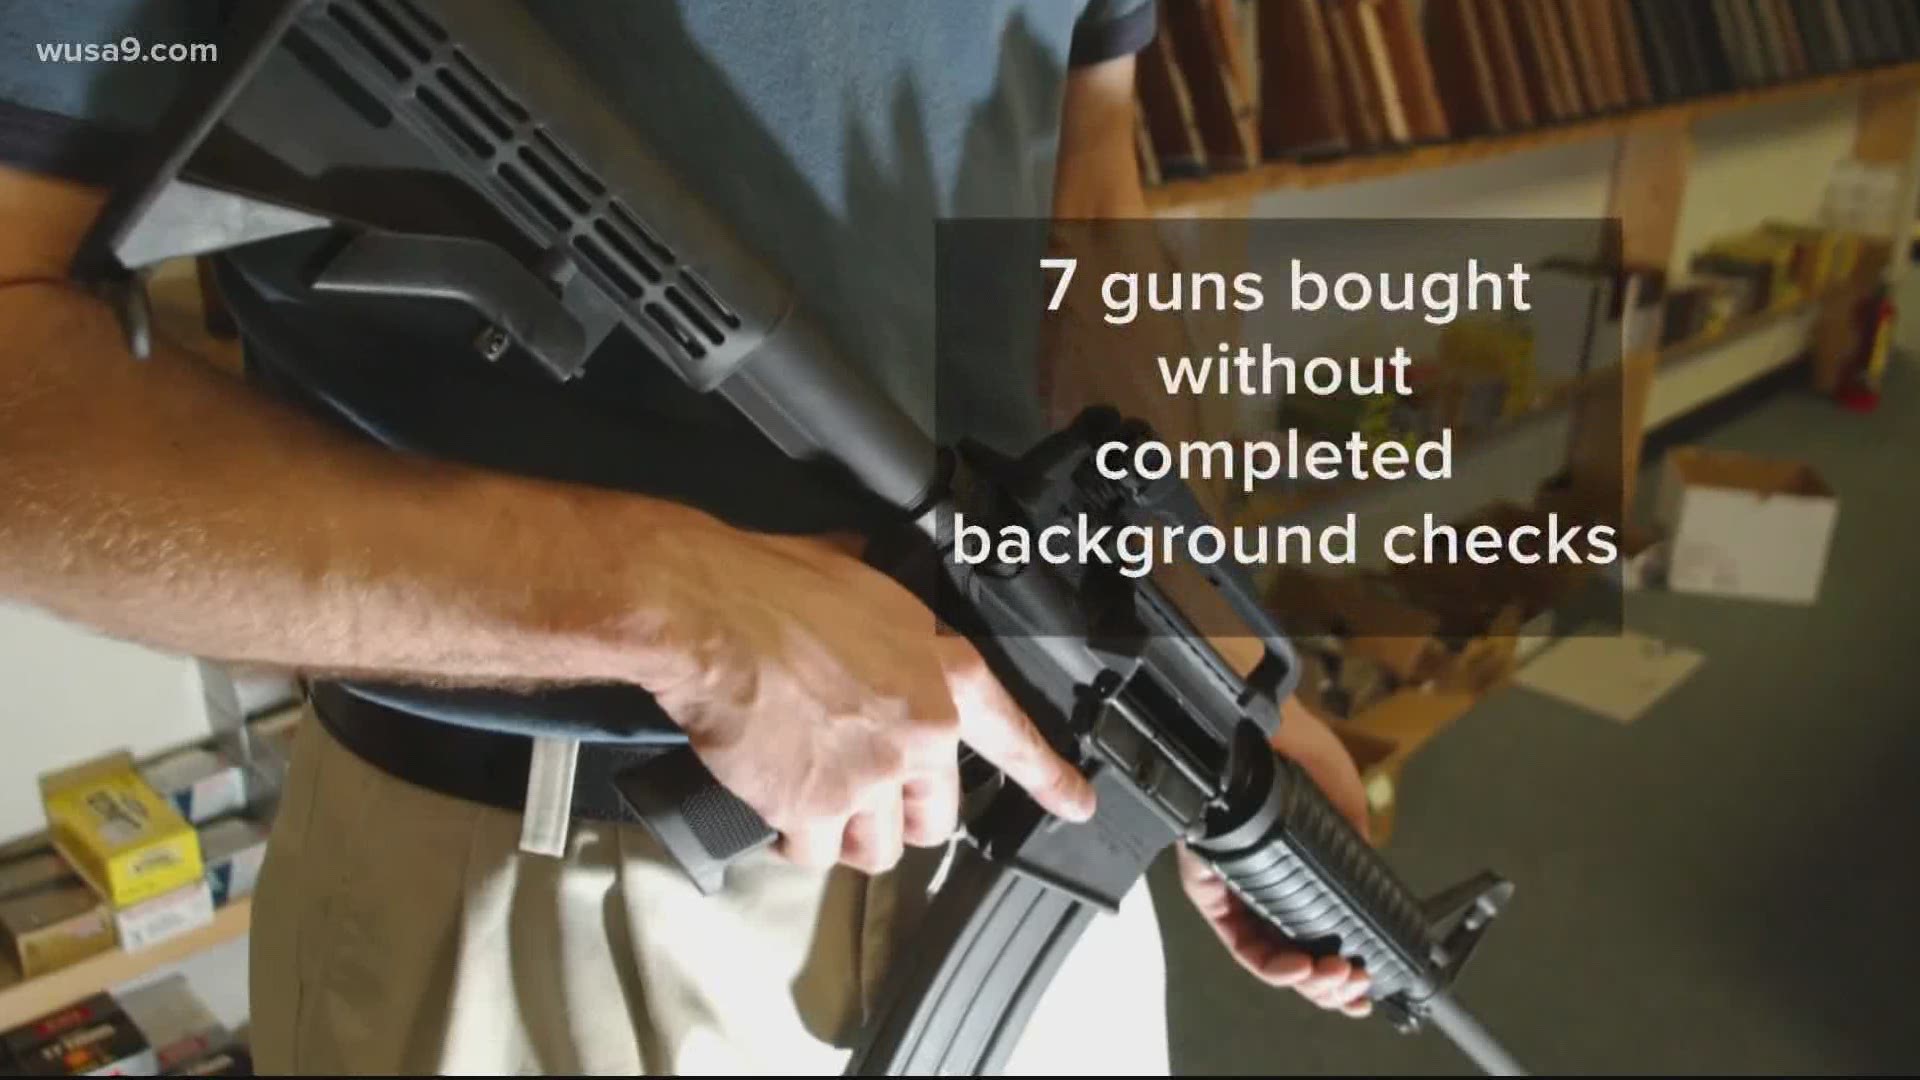 How Long Does It Take To Get A Background Check To Get A Gun